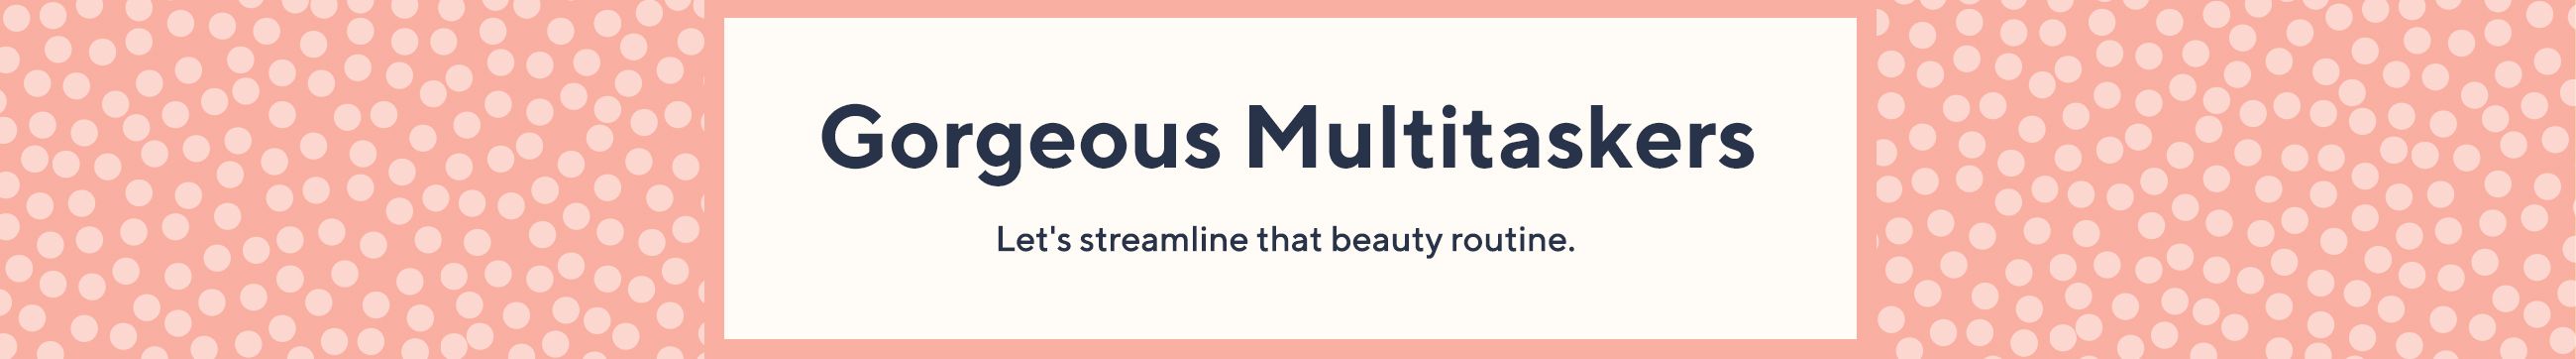 Gorgeous Multitaskers  - Let's streamline that beauty routine.